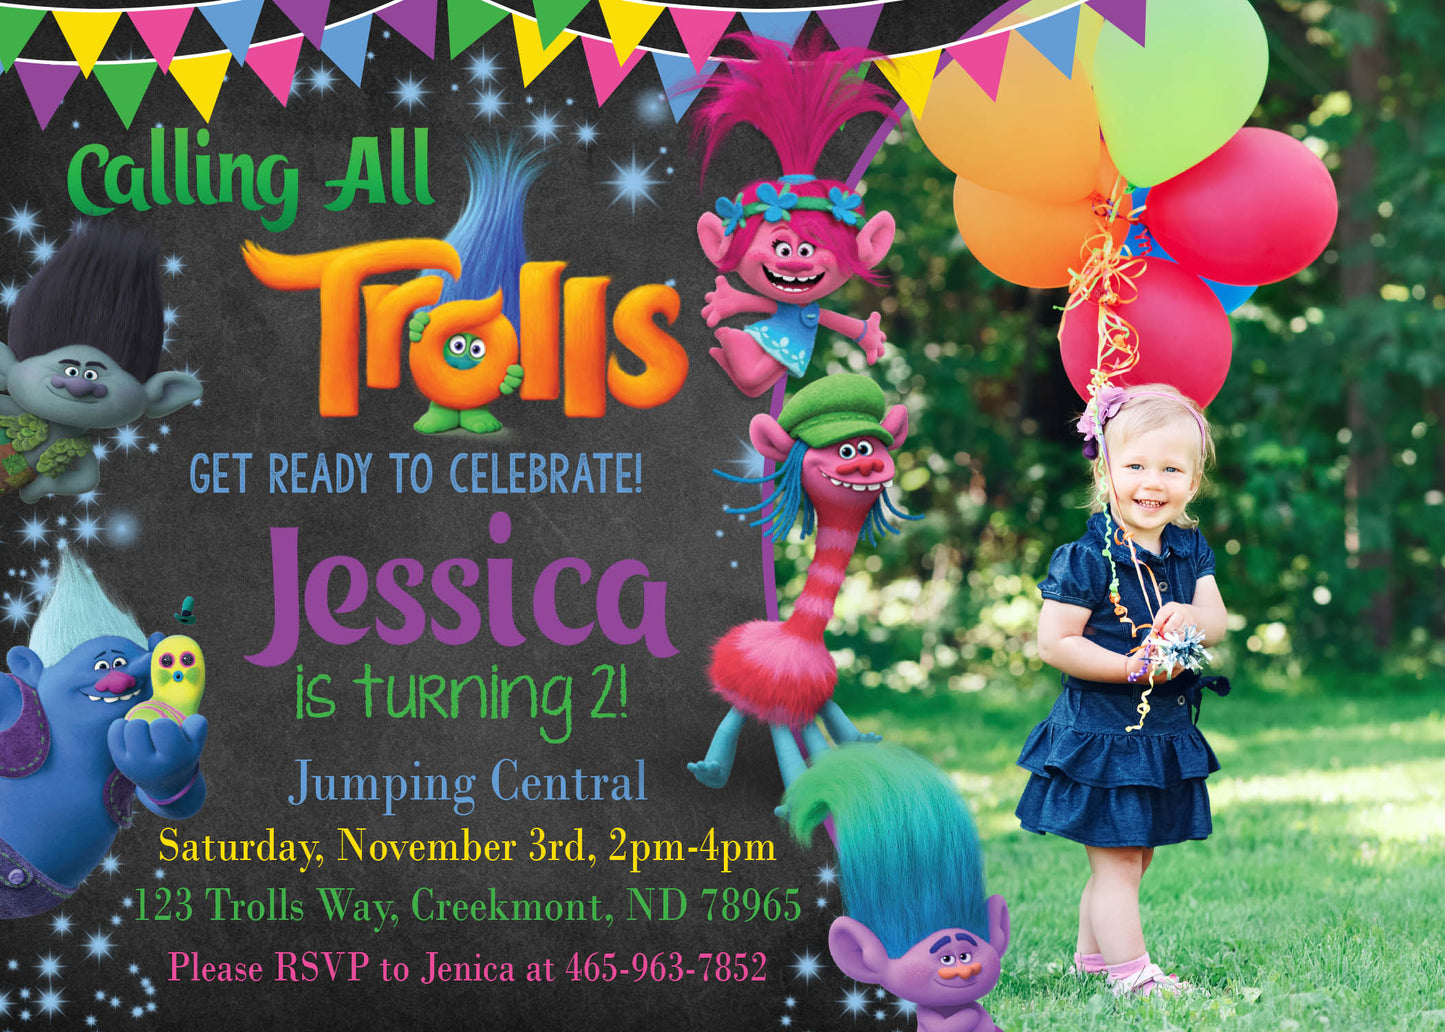 TROLLS Poppy, Branch, Cooper Birthday Party Invitation With Photo! Printed or Digital!